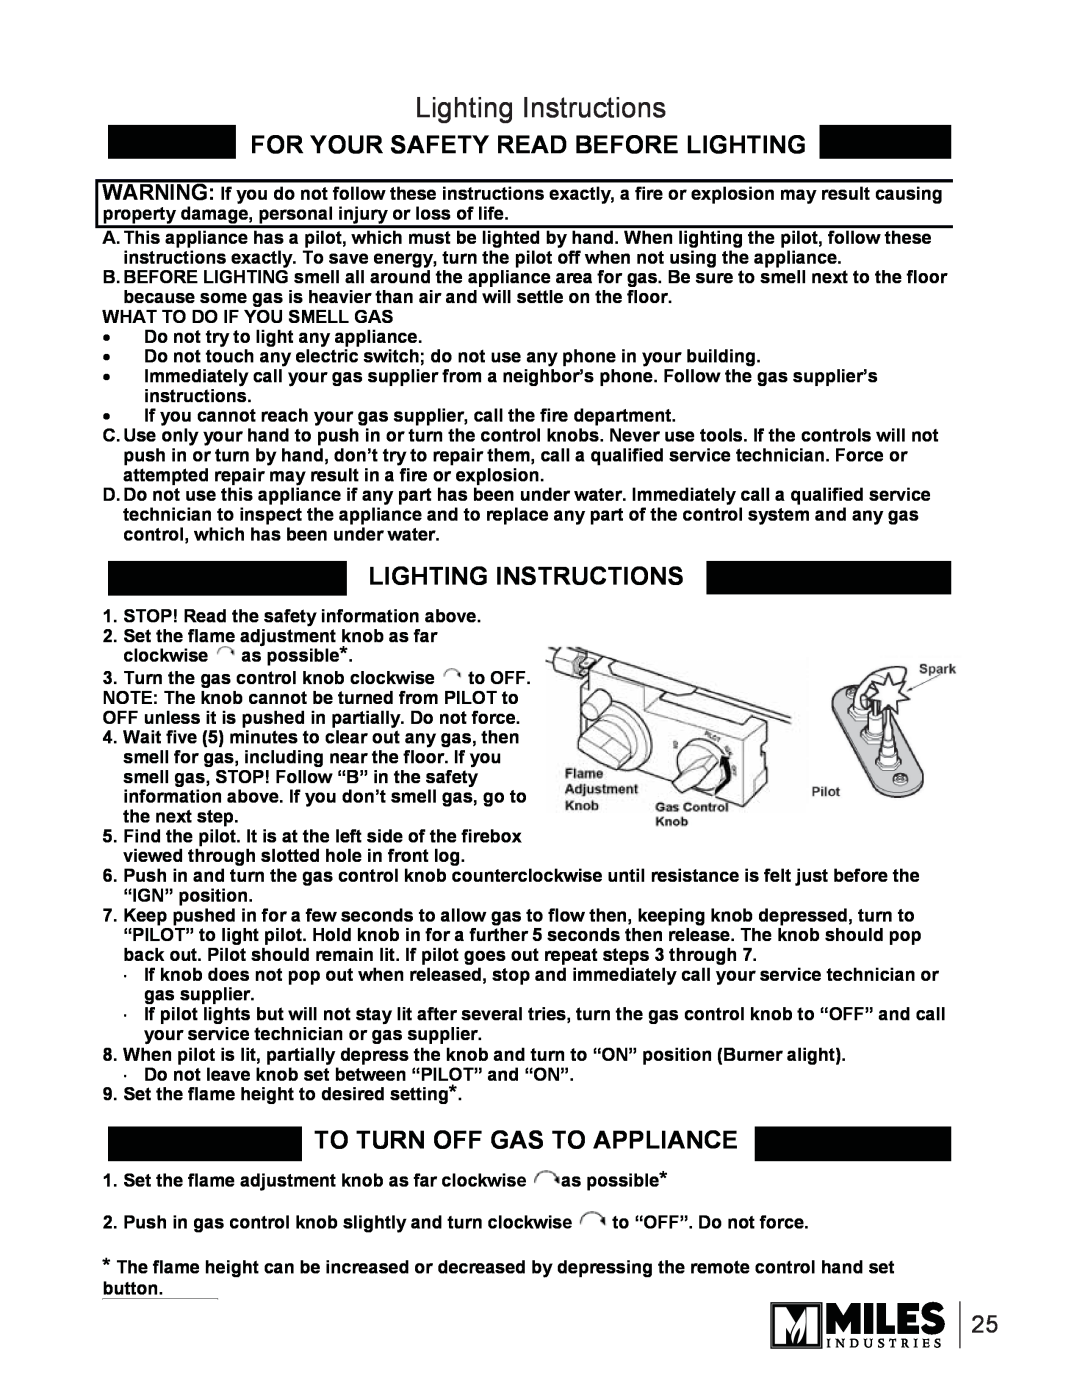 Valor Auto Companion Inc 739DVP Lighting Instructions, For Your Safety Read Before Lighting, To Turn Off Gas To Appliance 